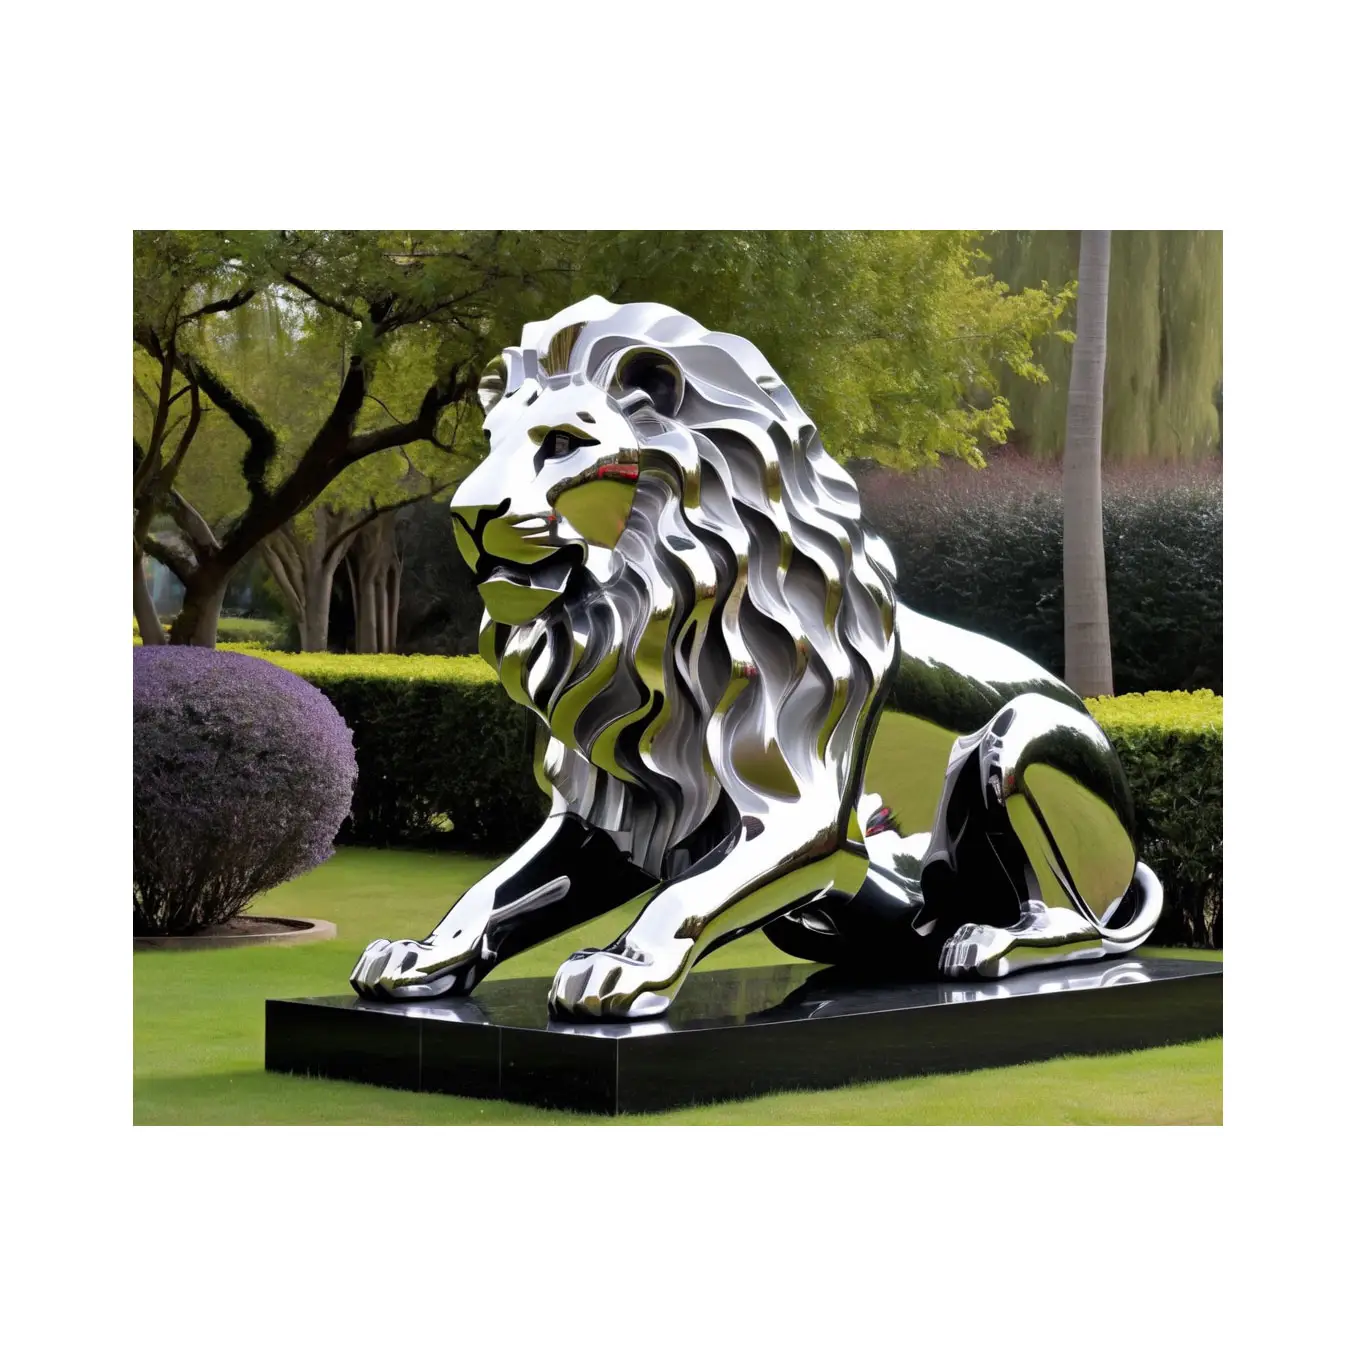 Large stainless steel lion statue fierce half-crouching lion ready to hunt sculpture for gov decor